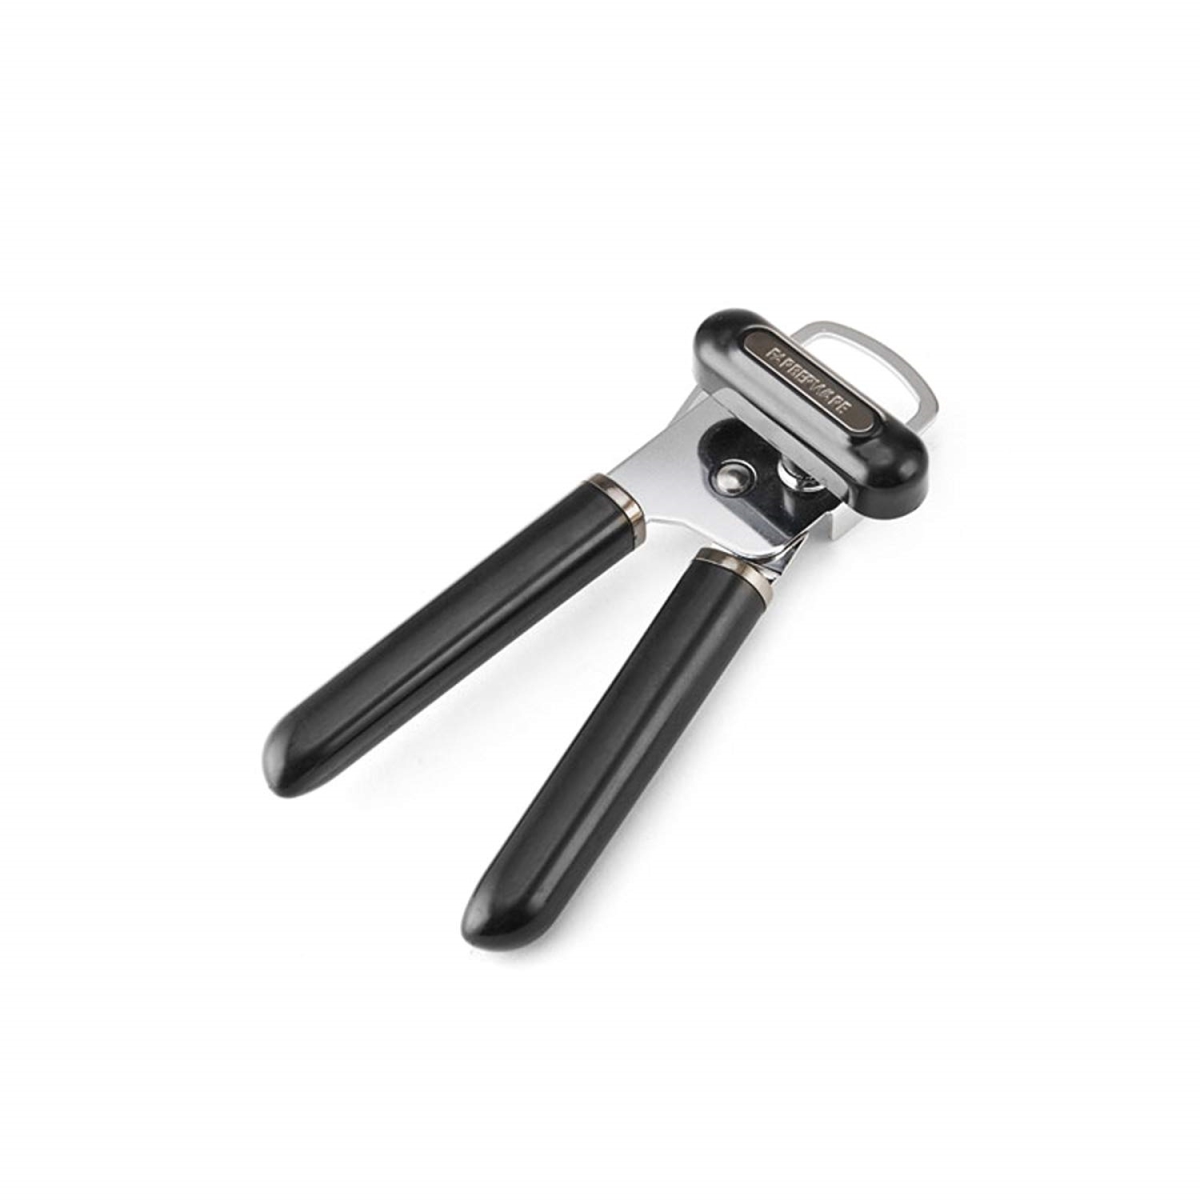 Picture of Lifetm 5211450 BLK Professional Can Opener with Built-in Bottle Opener, Black - Pack of 3